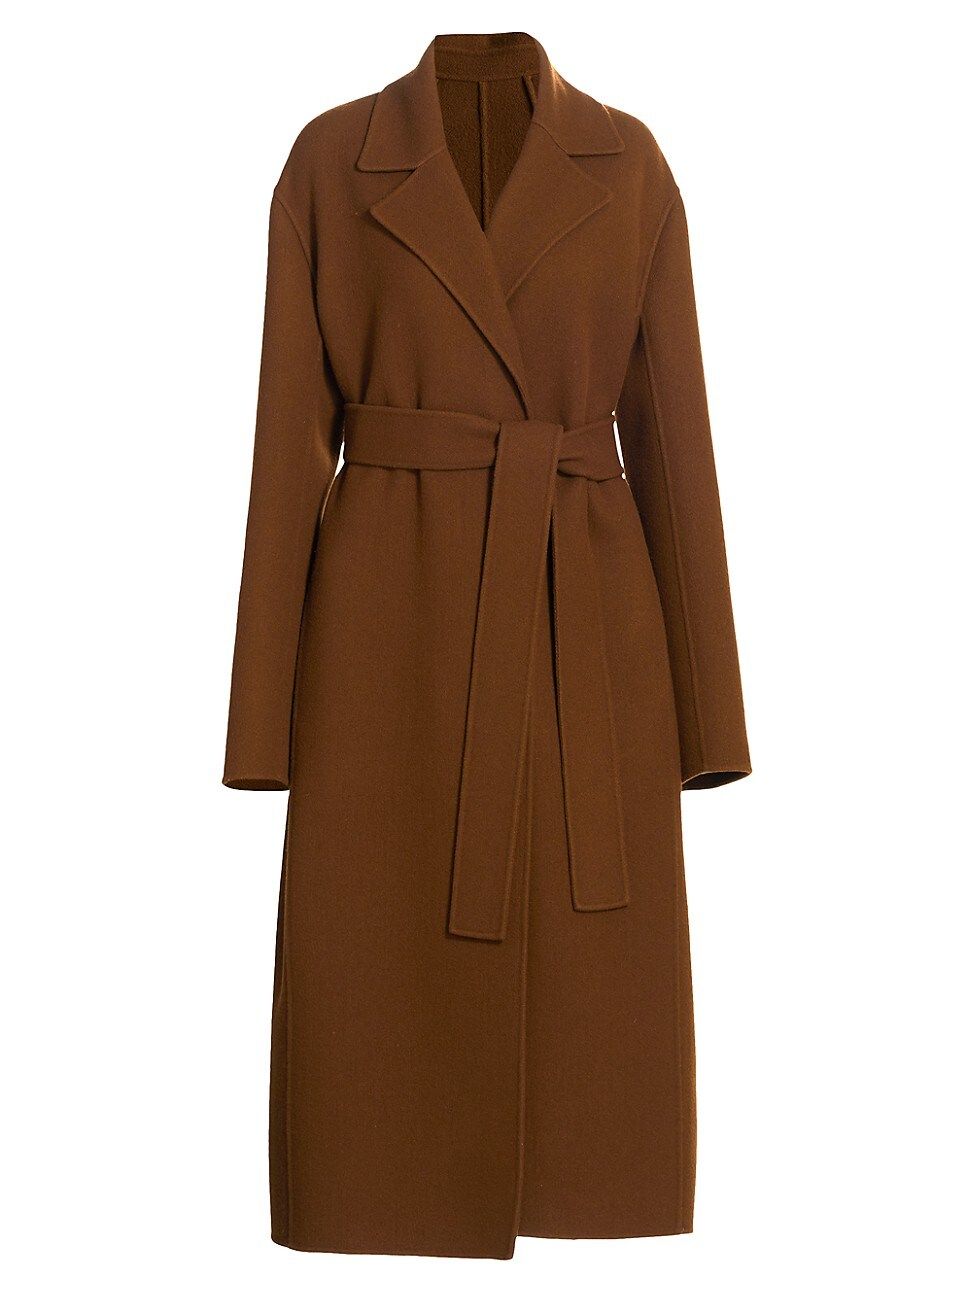 The Row Women's Malika Wool-Blend Long Belted Coat - Saddle Brown - Size Small | Saks Fifth Avenue